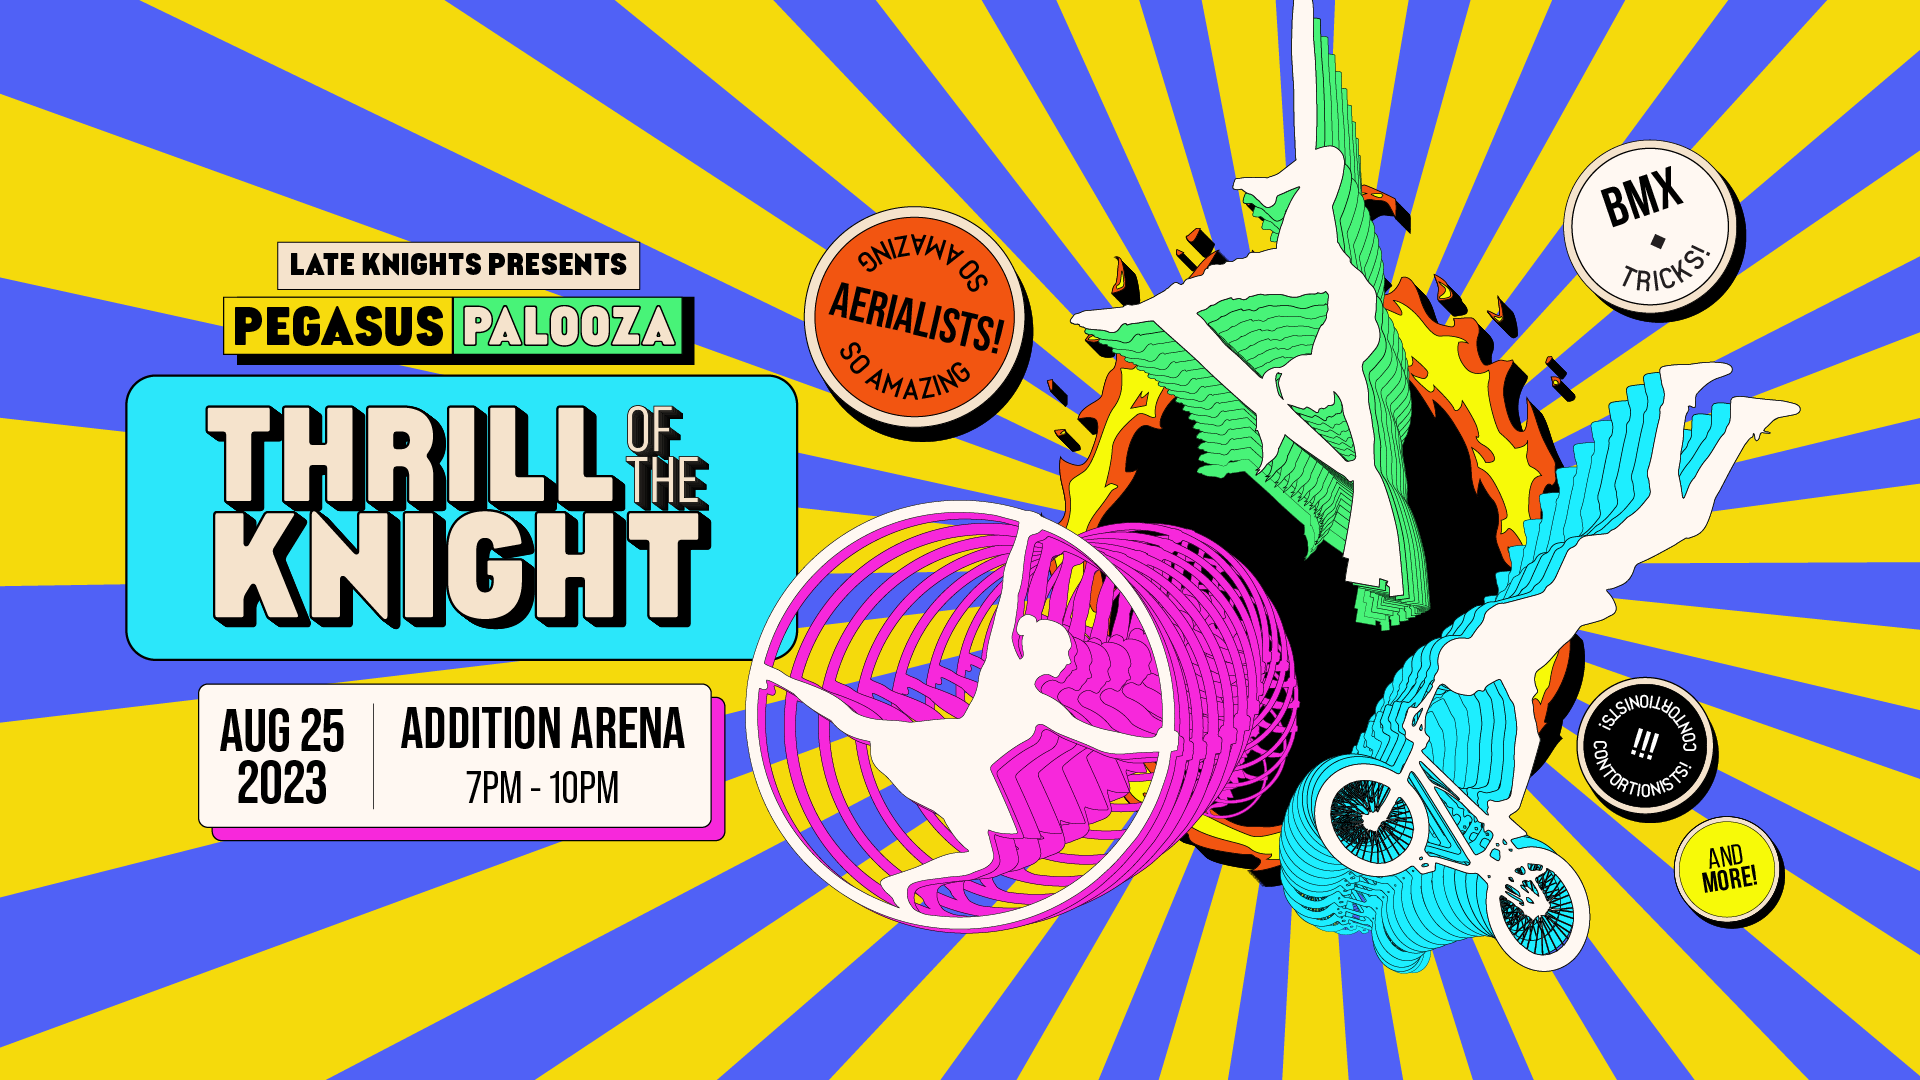 Illustration of three performers' silhouettes on the right; on the text is the following text: Late Knights Presents; Pegasus Palooza; Thrill of the Knight; August 23, 2023; Addition Arena; 7pm to 10pm